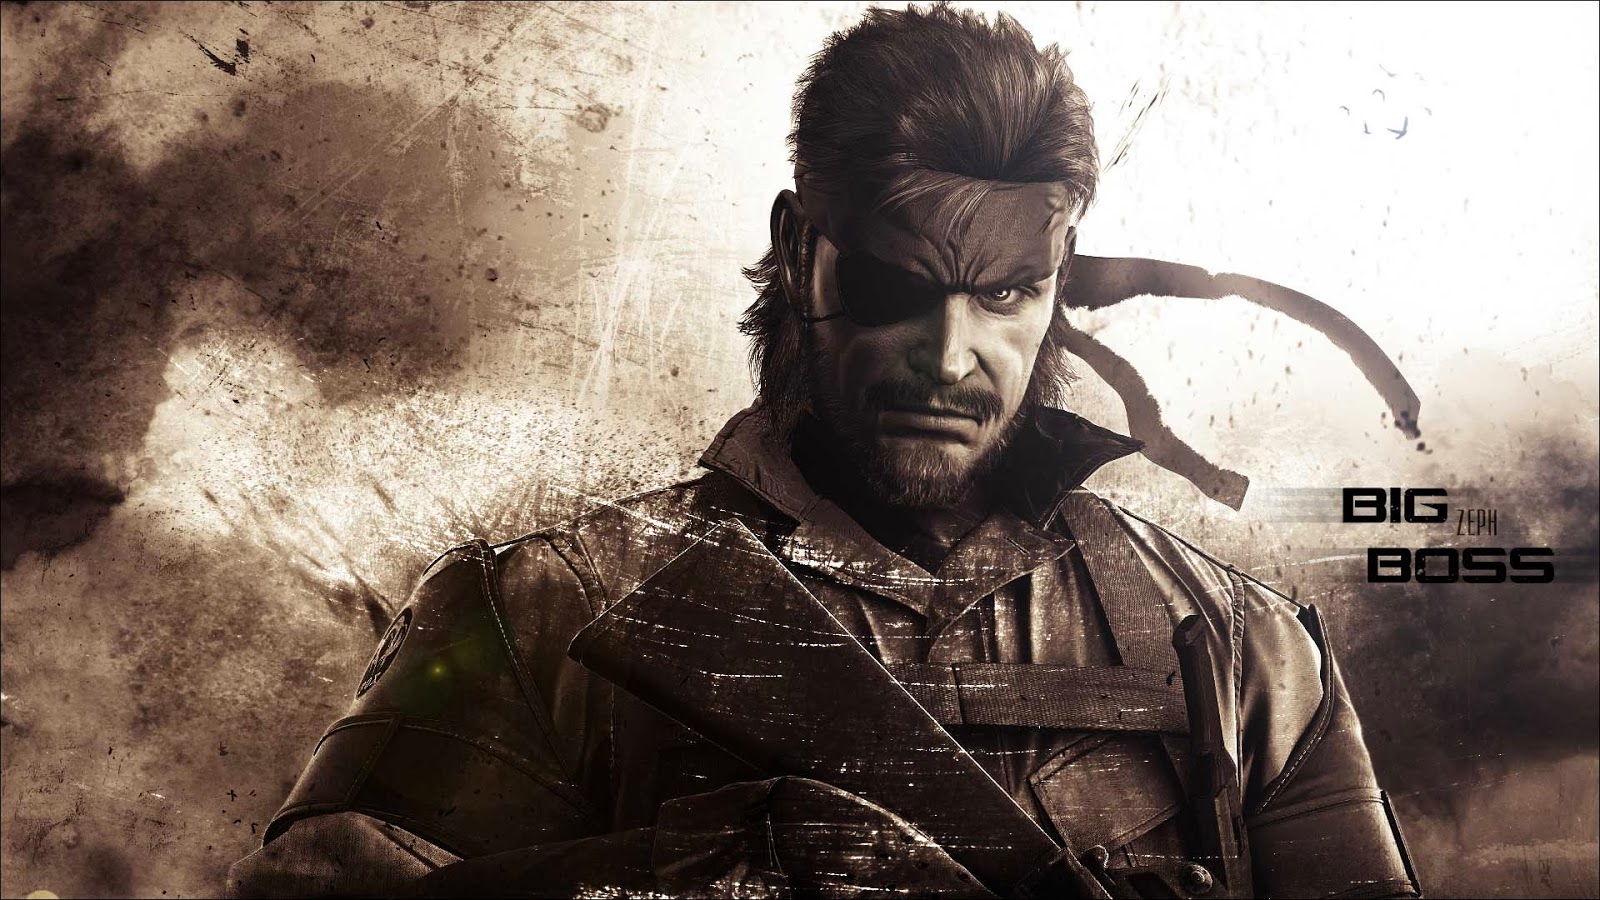 mgs 5 wallpaper,action adventure game,movie,human,action film,fictional character